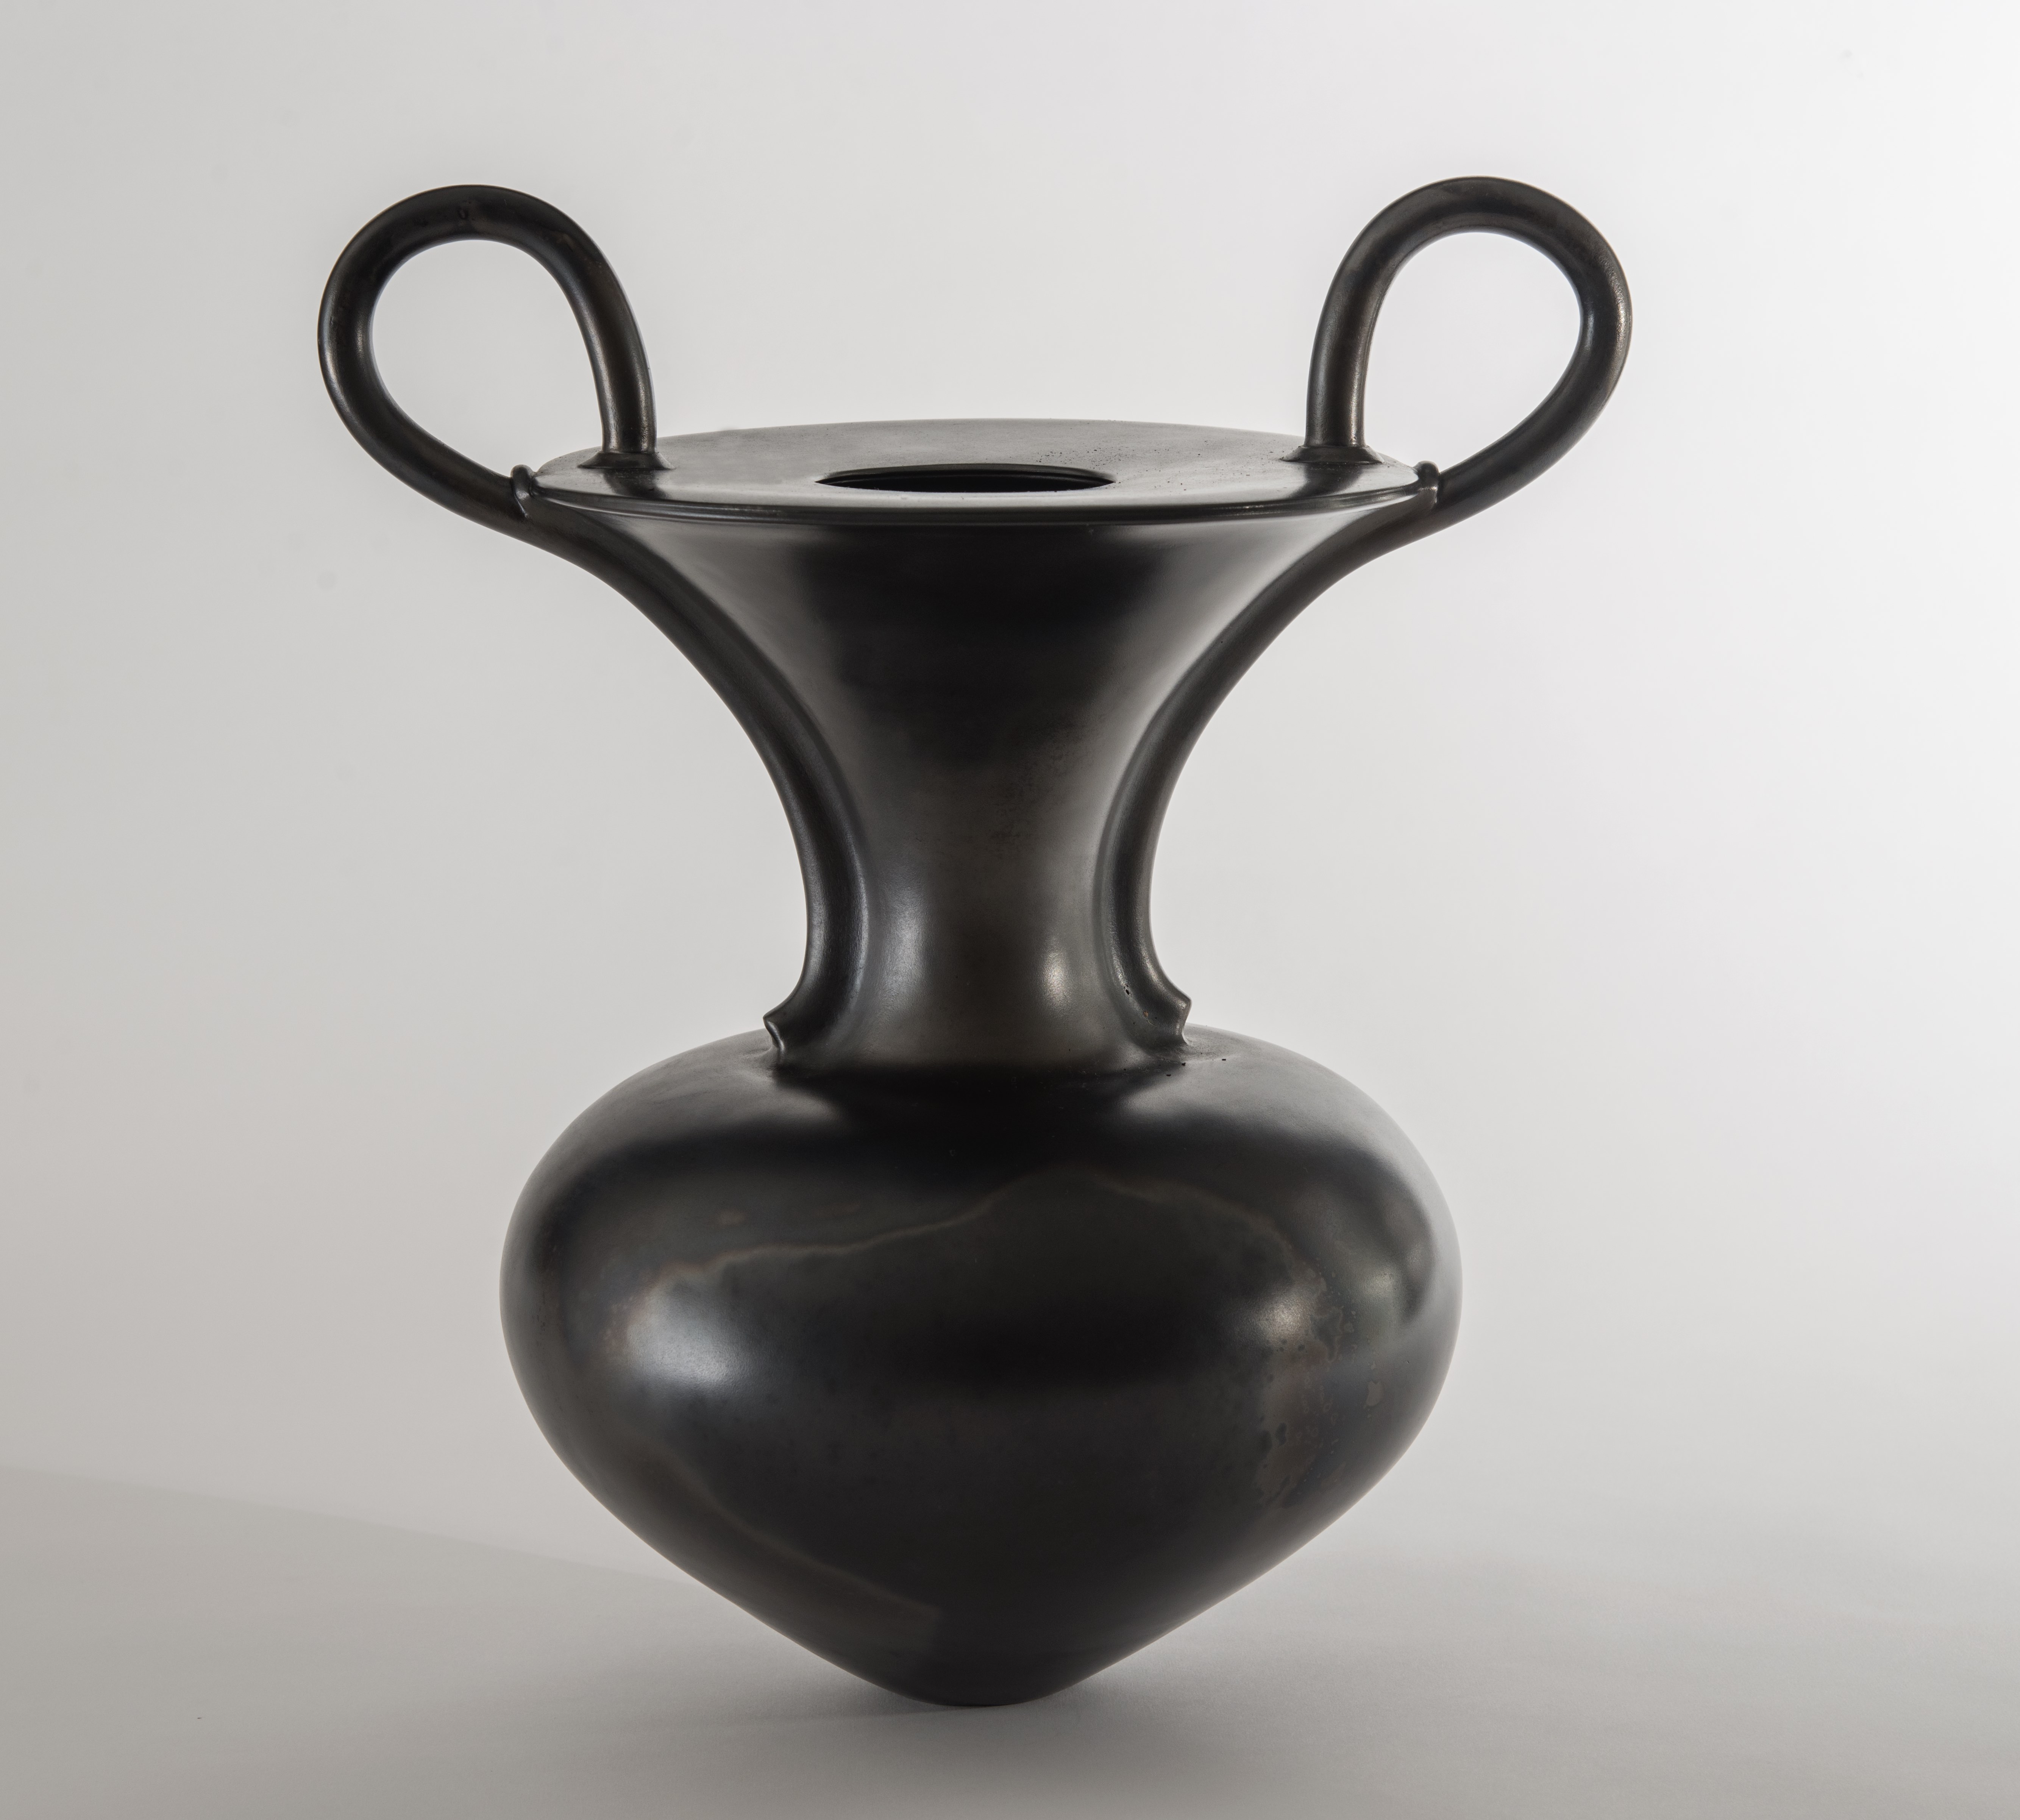 A vase with two handles in a shiny black glaze, on a white background.